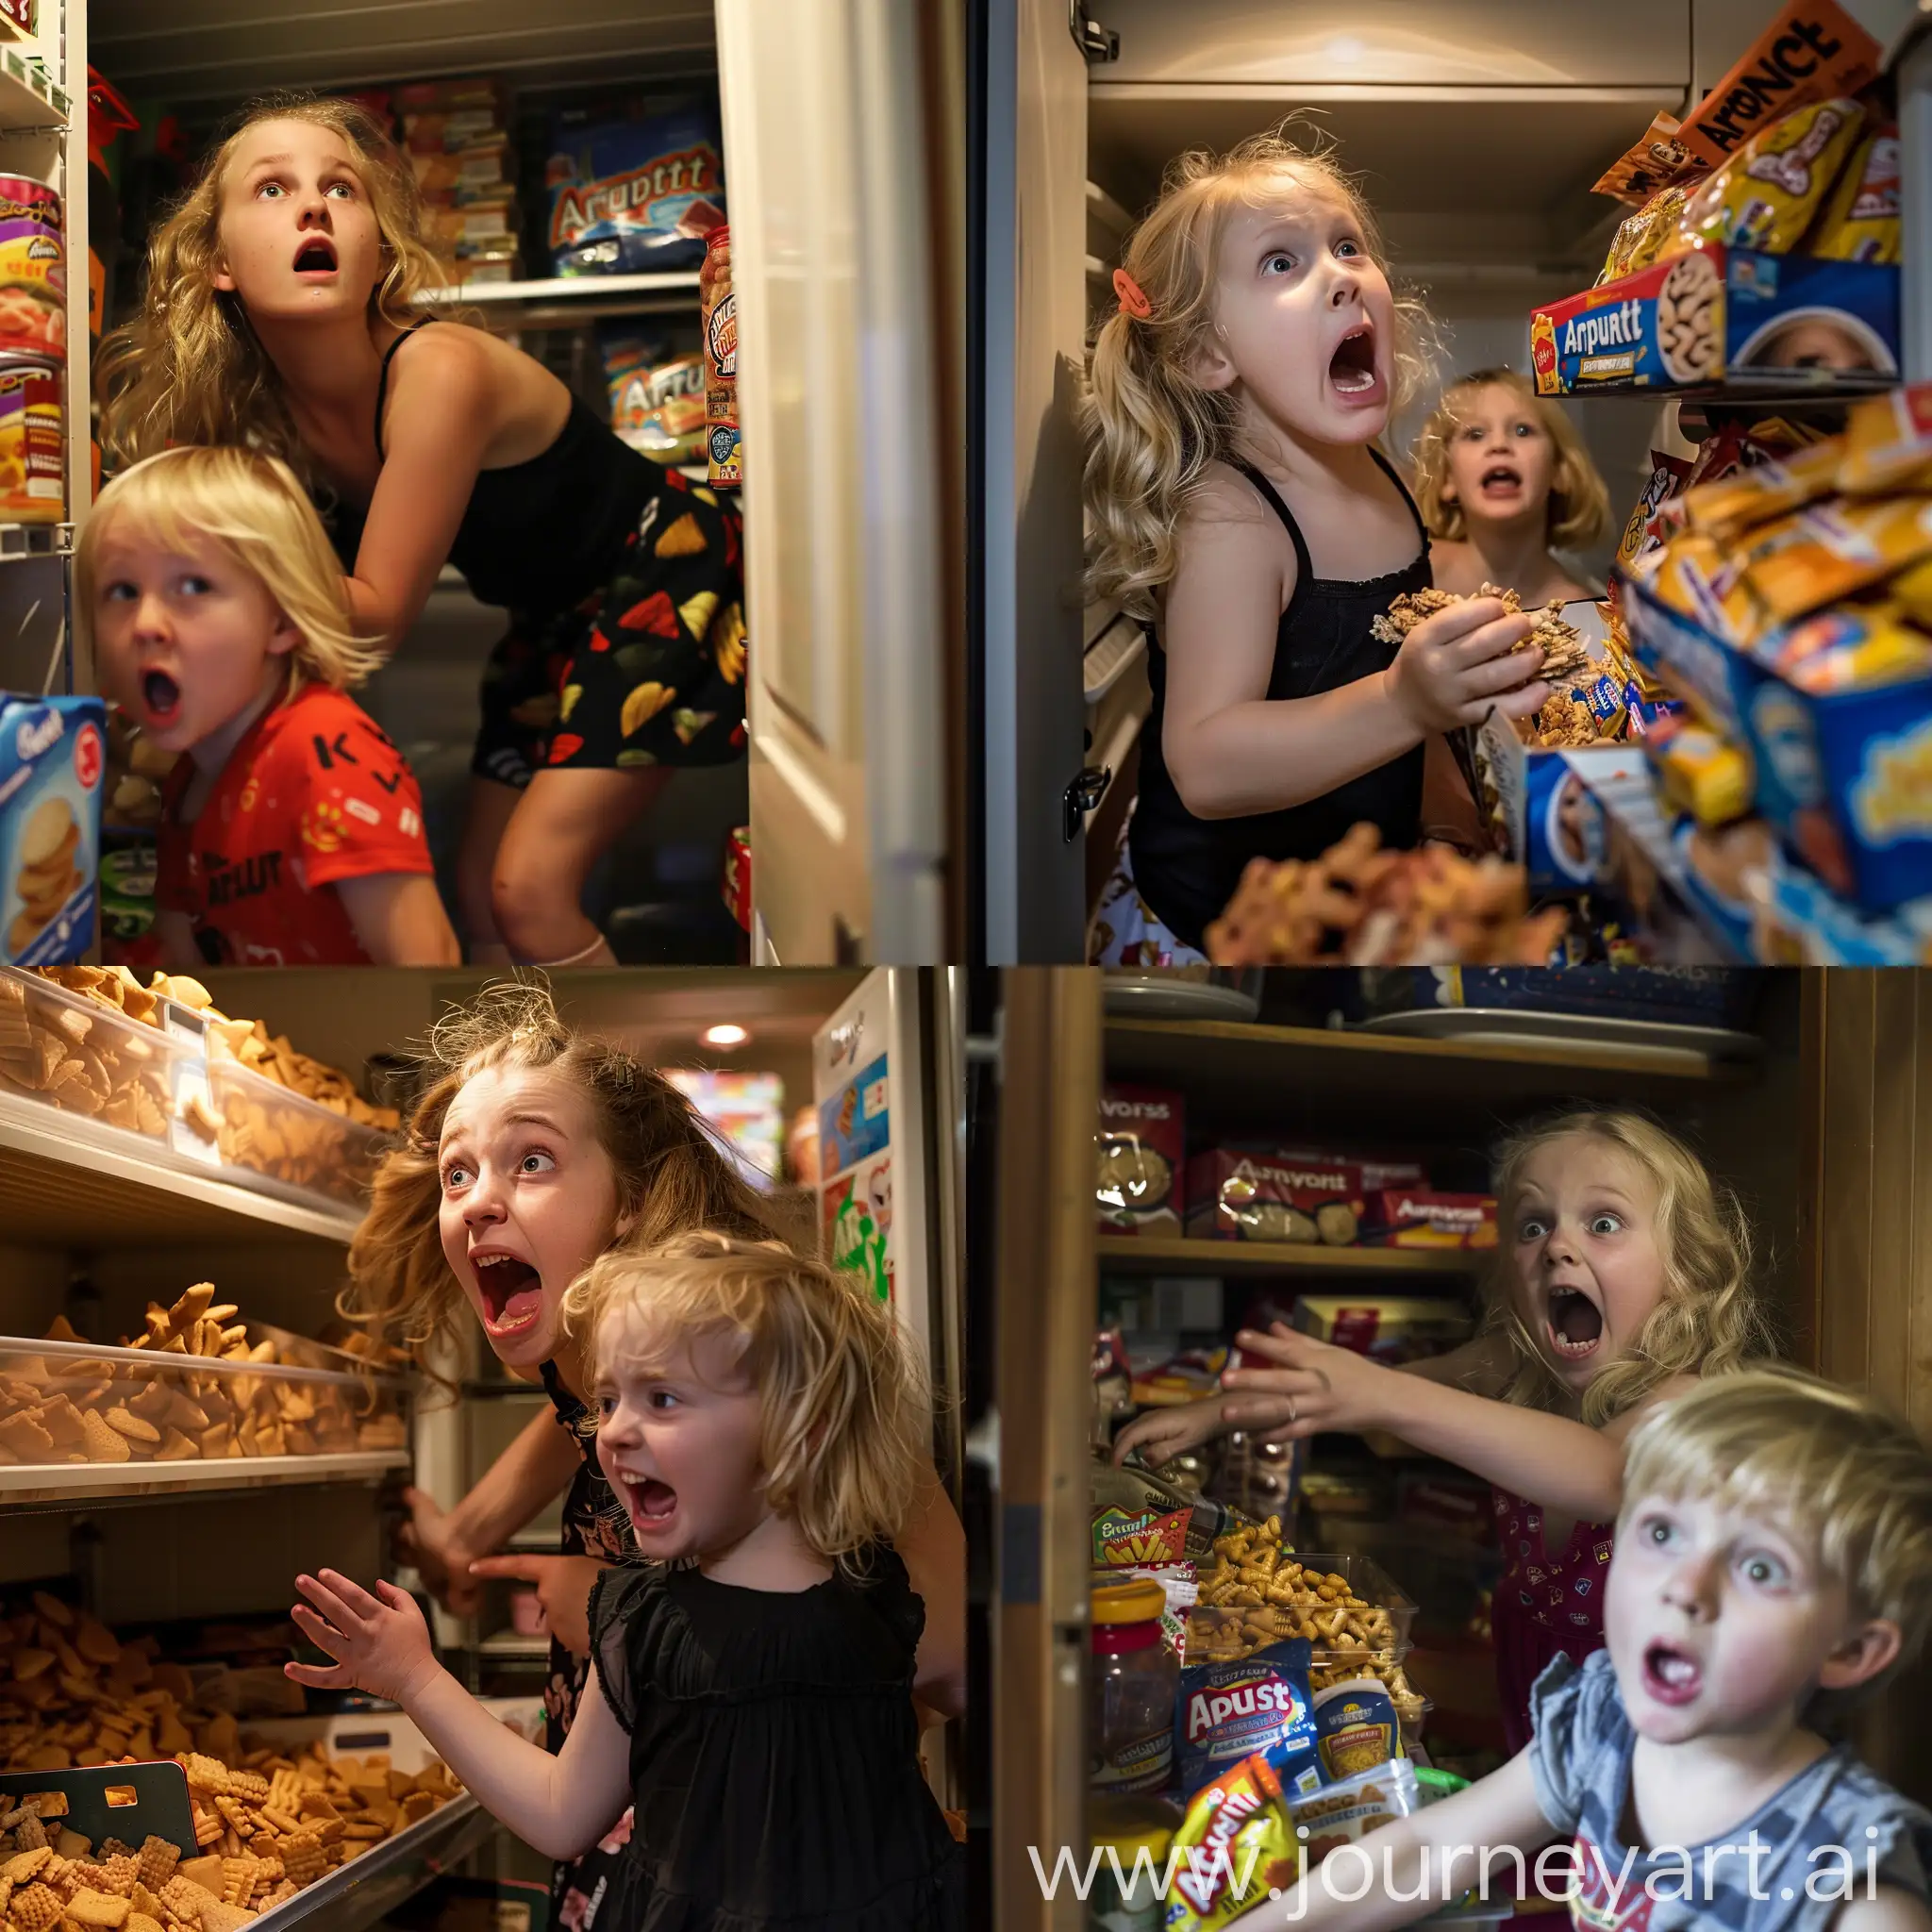 Child-Sneaking-Arnotts-Shapes-from-Pantry-Amidst-Siblings-Protest